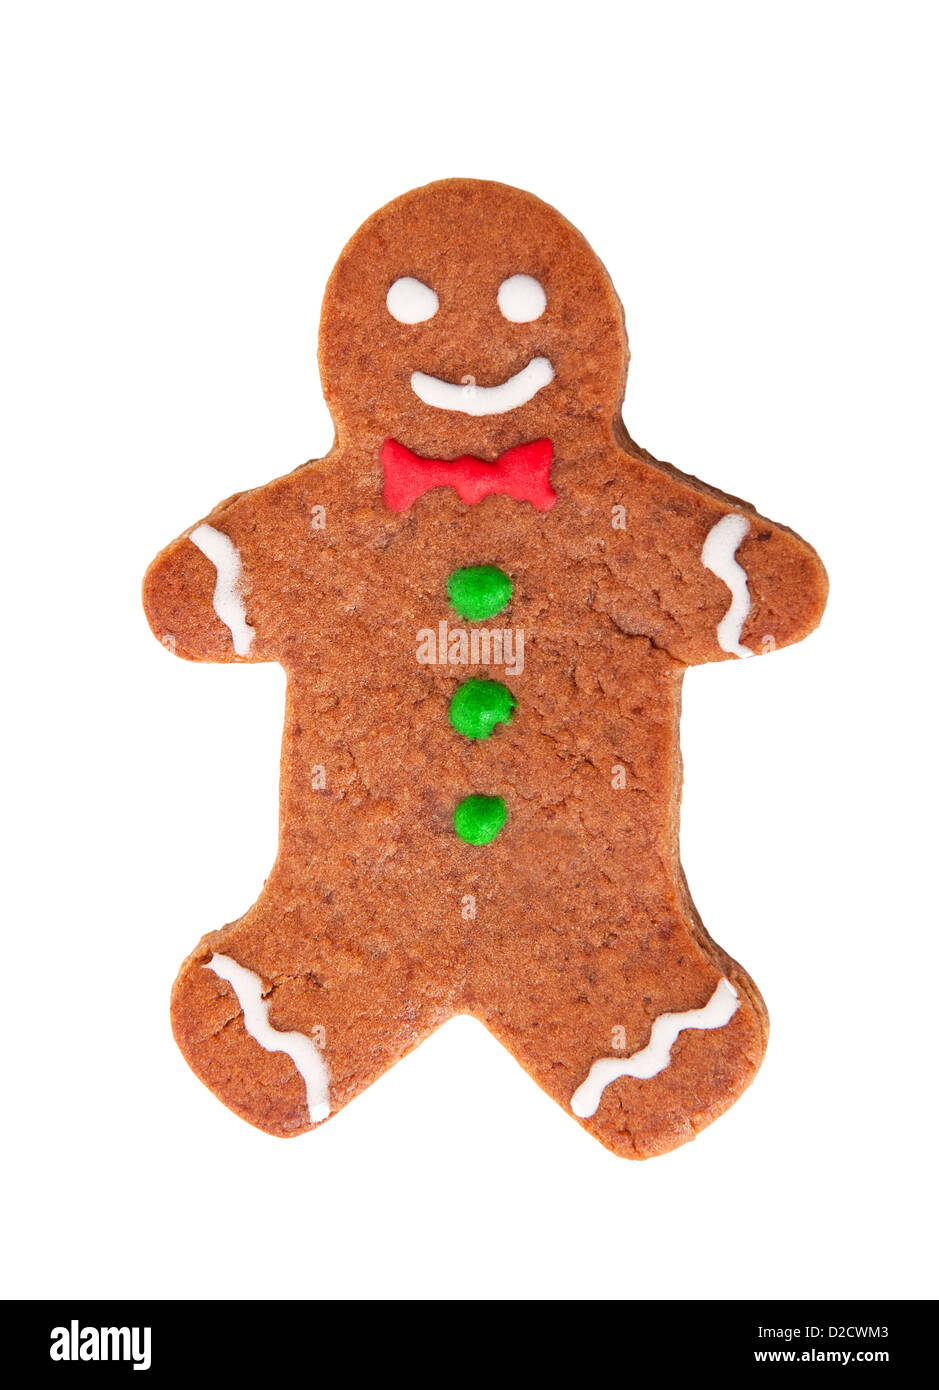 Gingerbread man isolated on white background Stock Photo